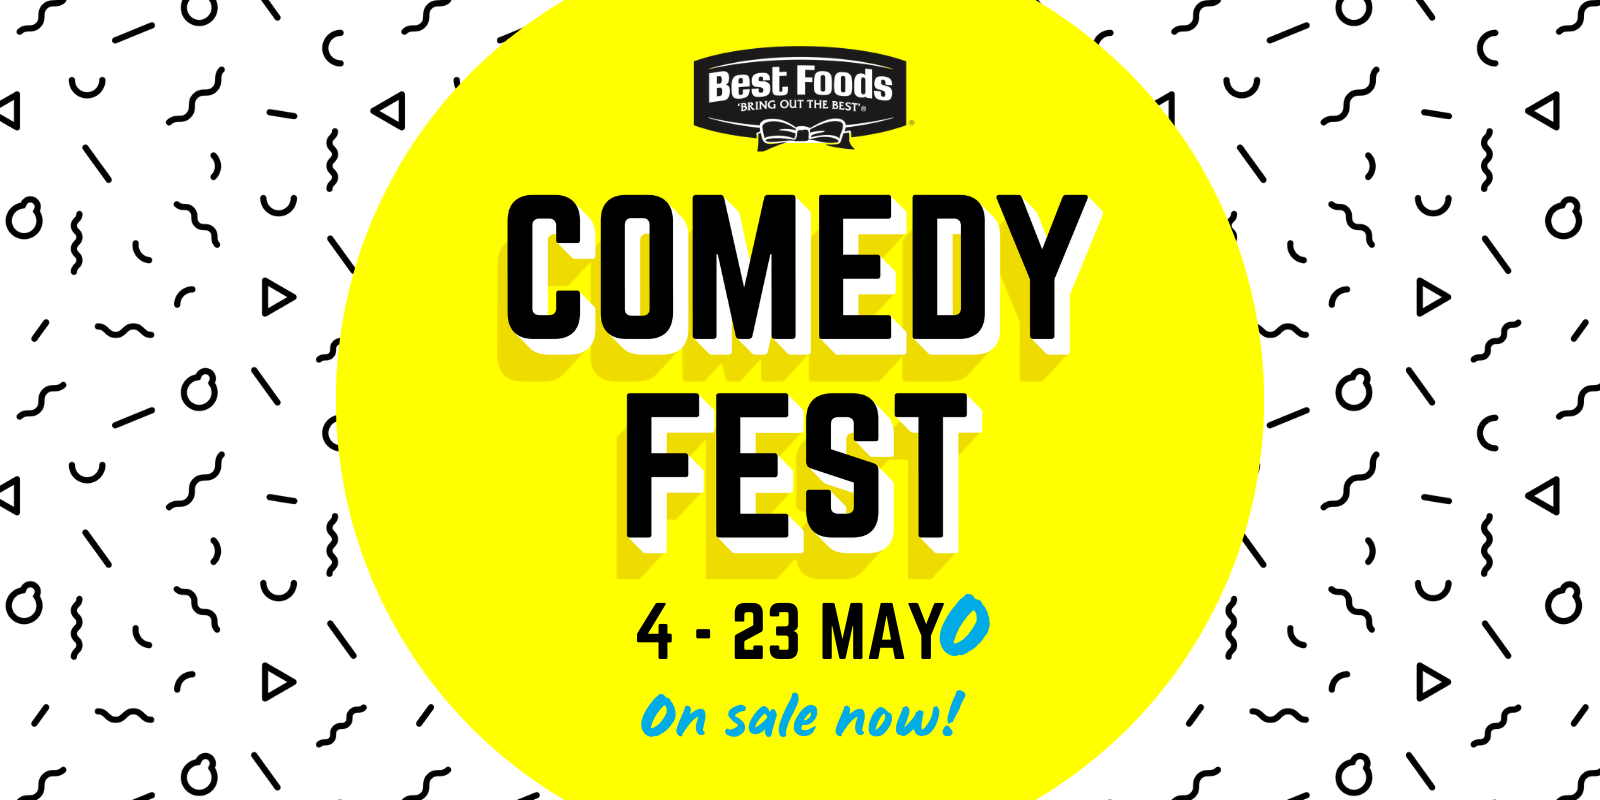 KIWI COMEDY TAKES CENTRE STAGE IN THE 2021 NZ COMEDY FEST WITH BEST FOODS MAYO